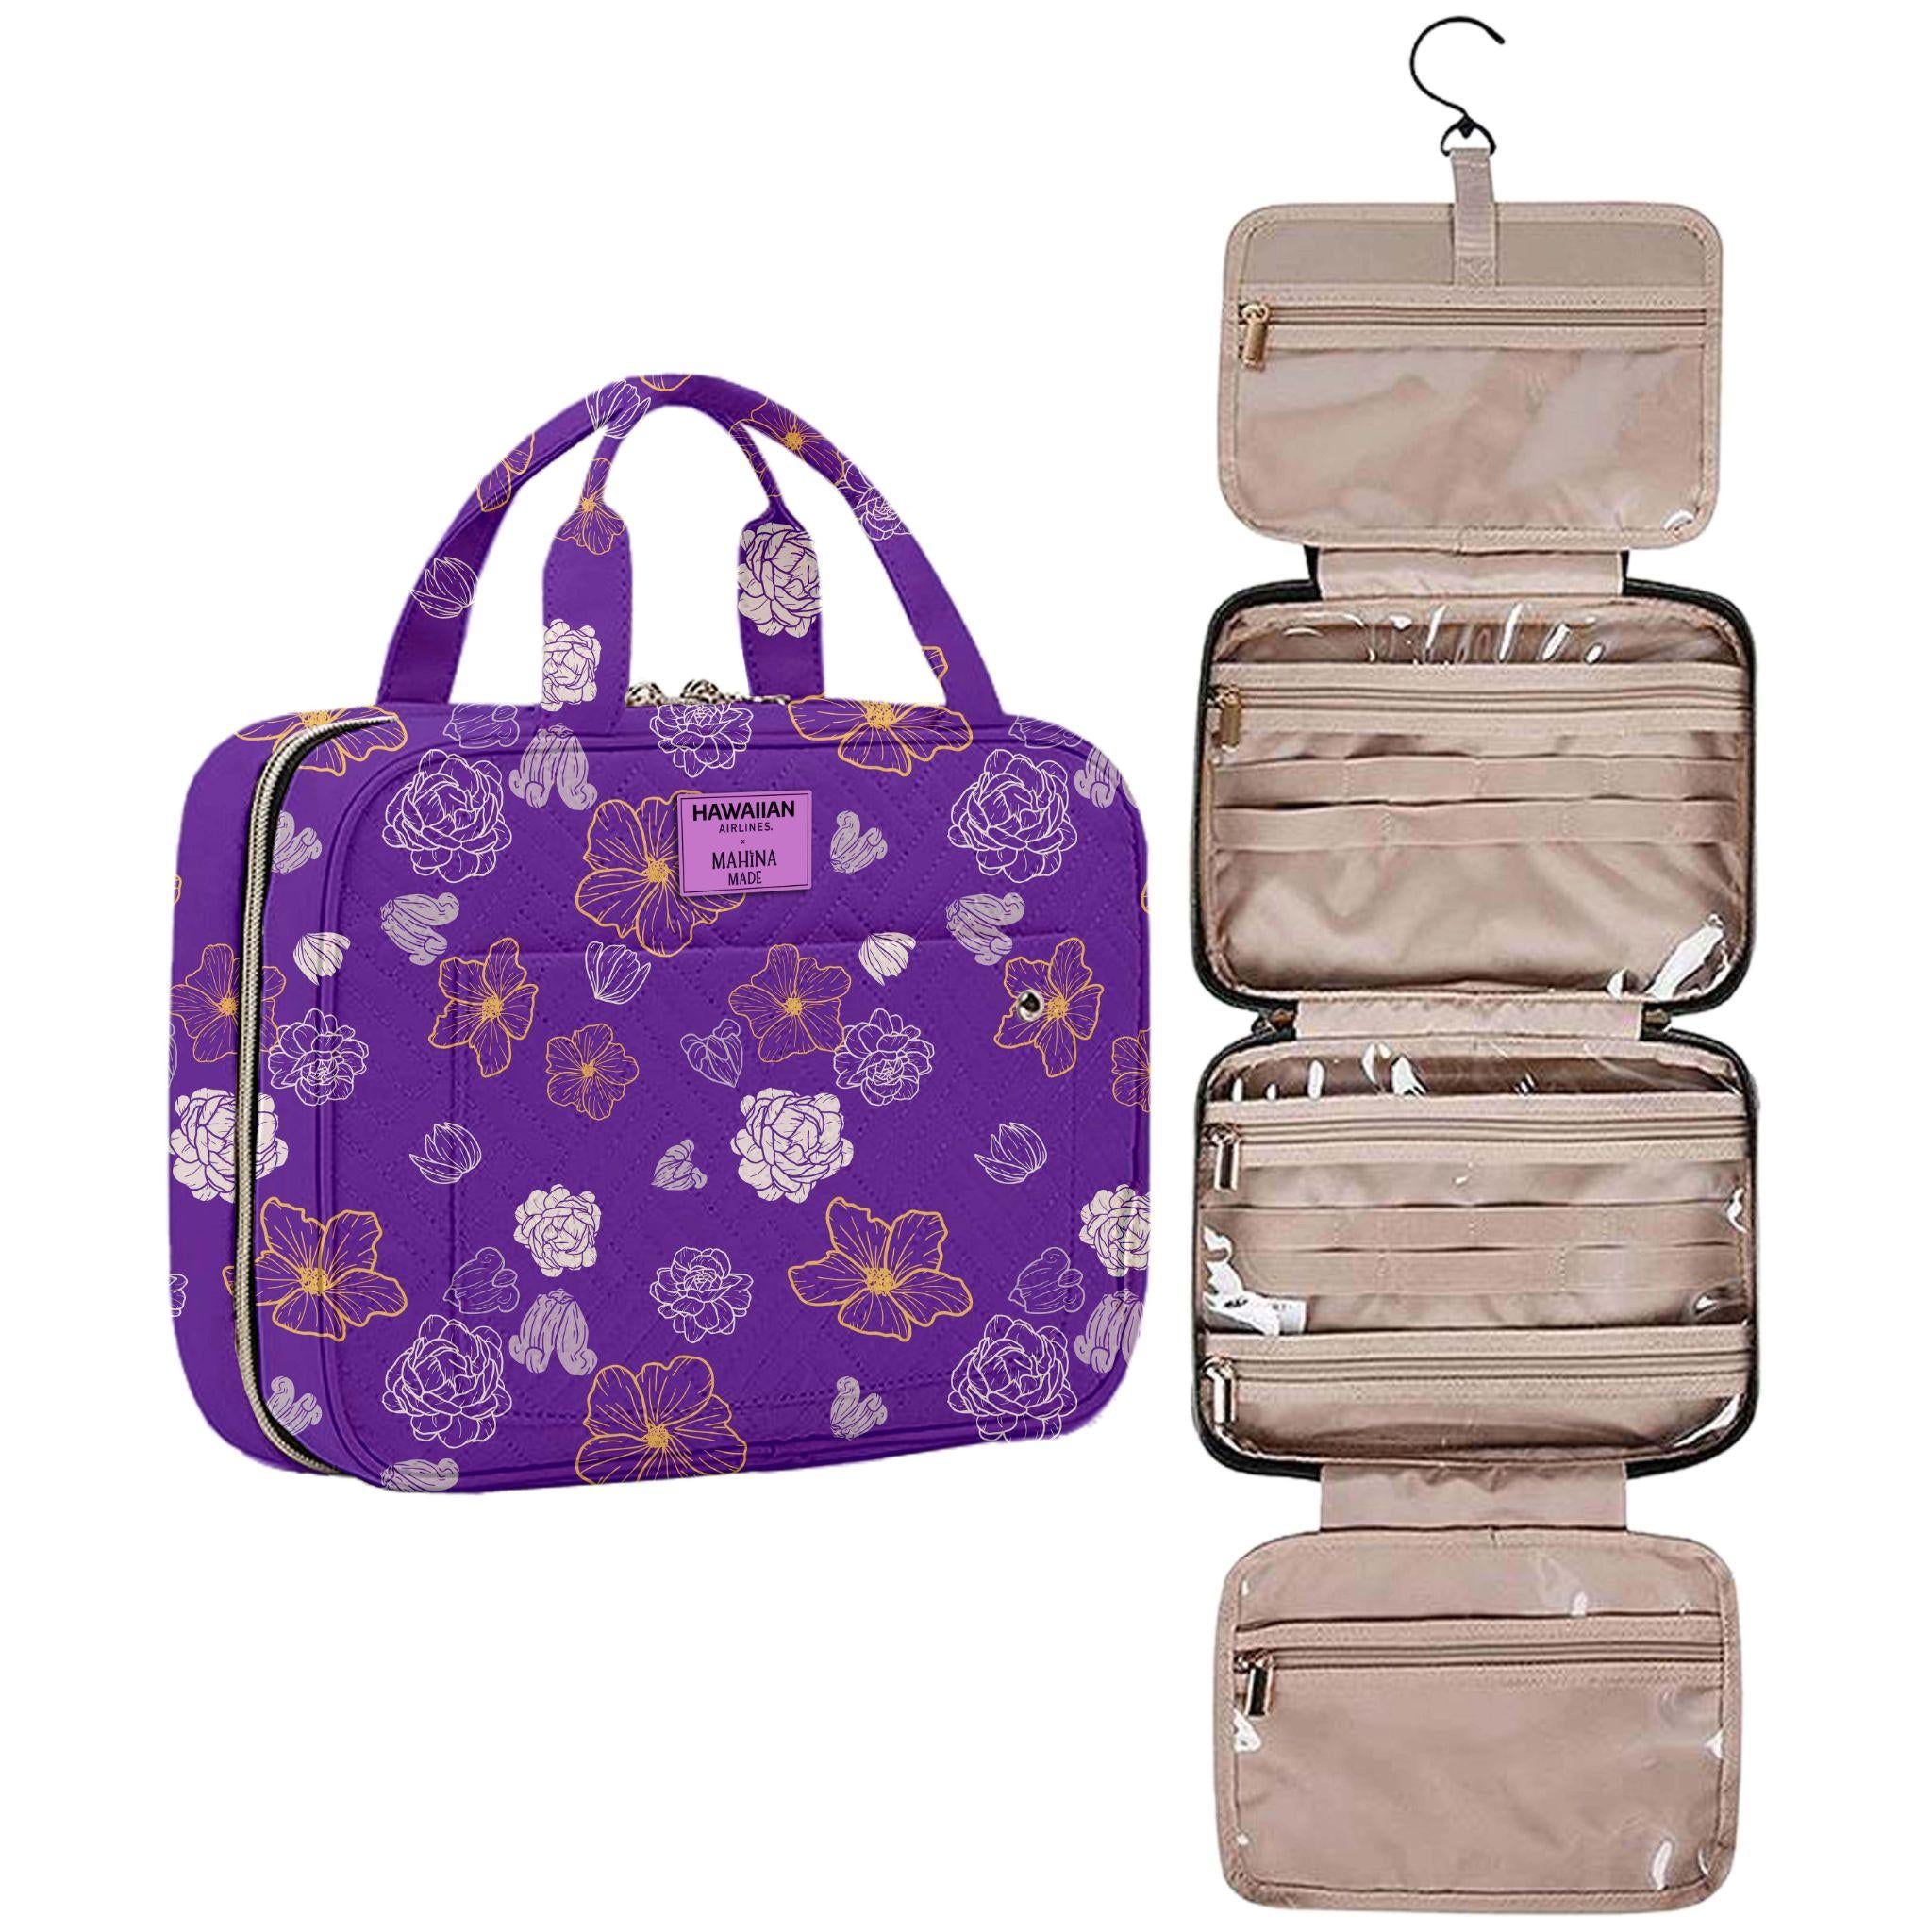 Auali'i Hanging Toiletry Bag